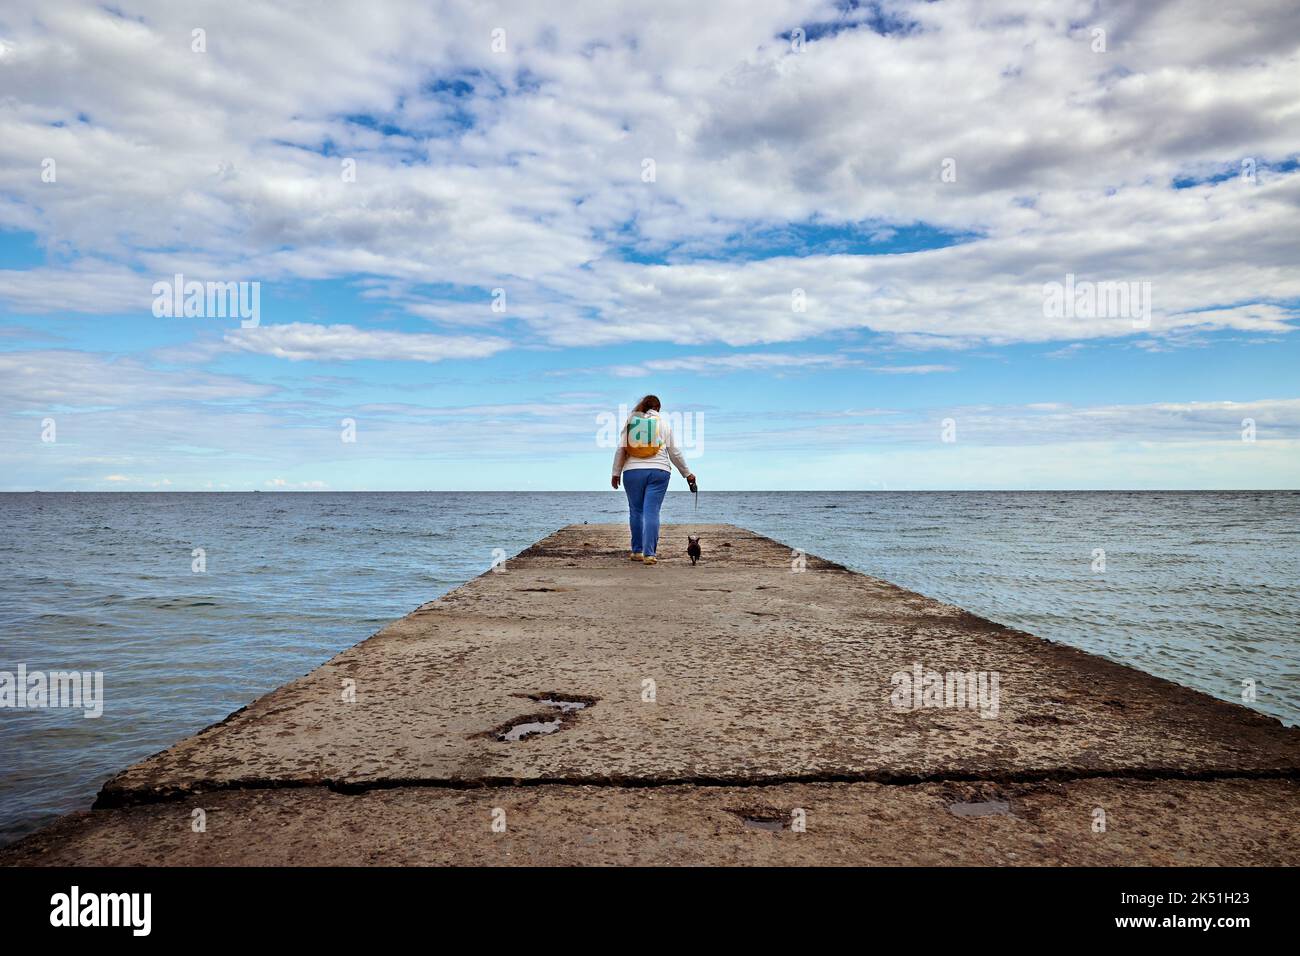 A woman with a small dog on a leash walk along the pier towards the blue sky with white cirrus clouds Stock Photo